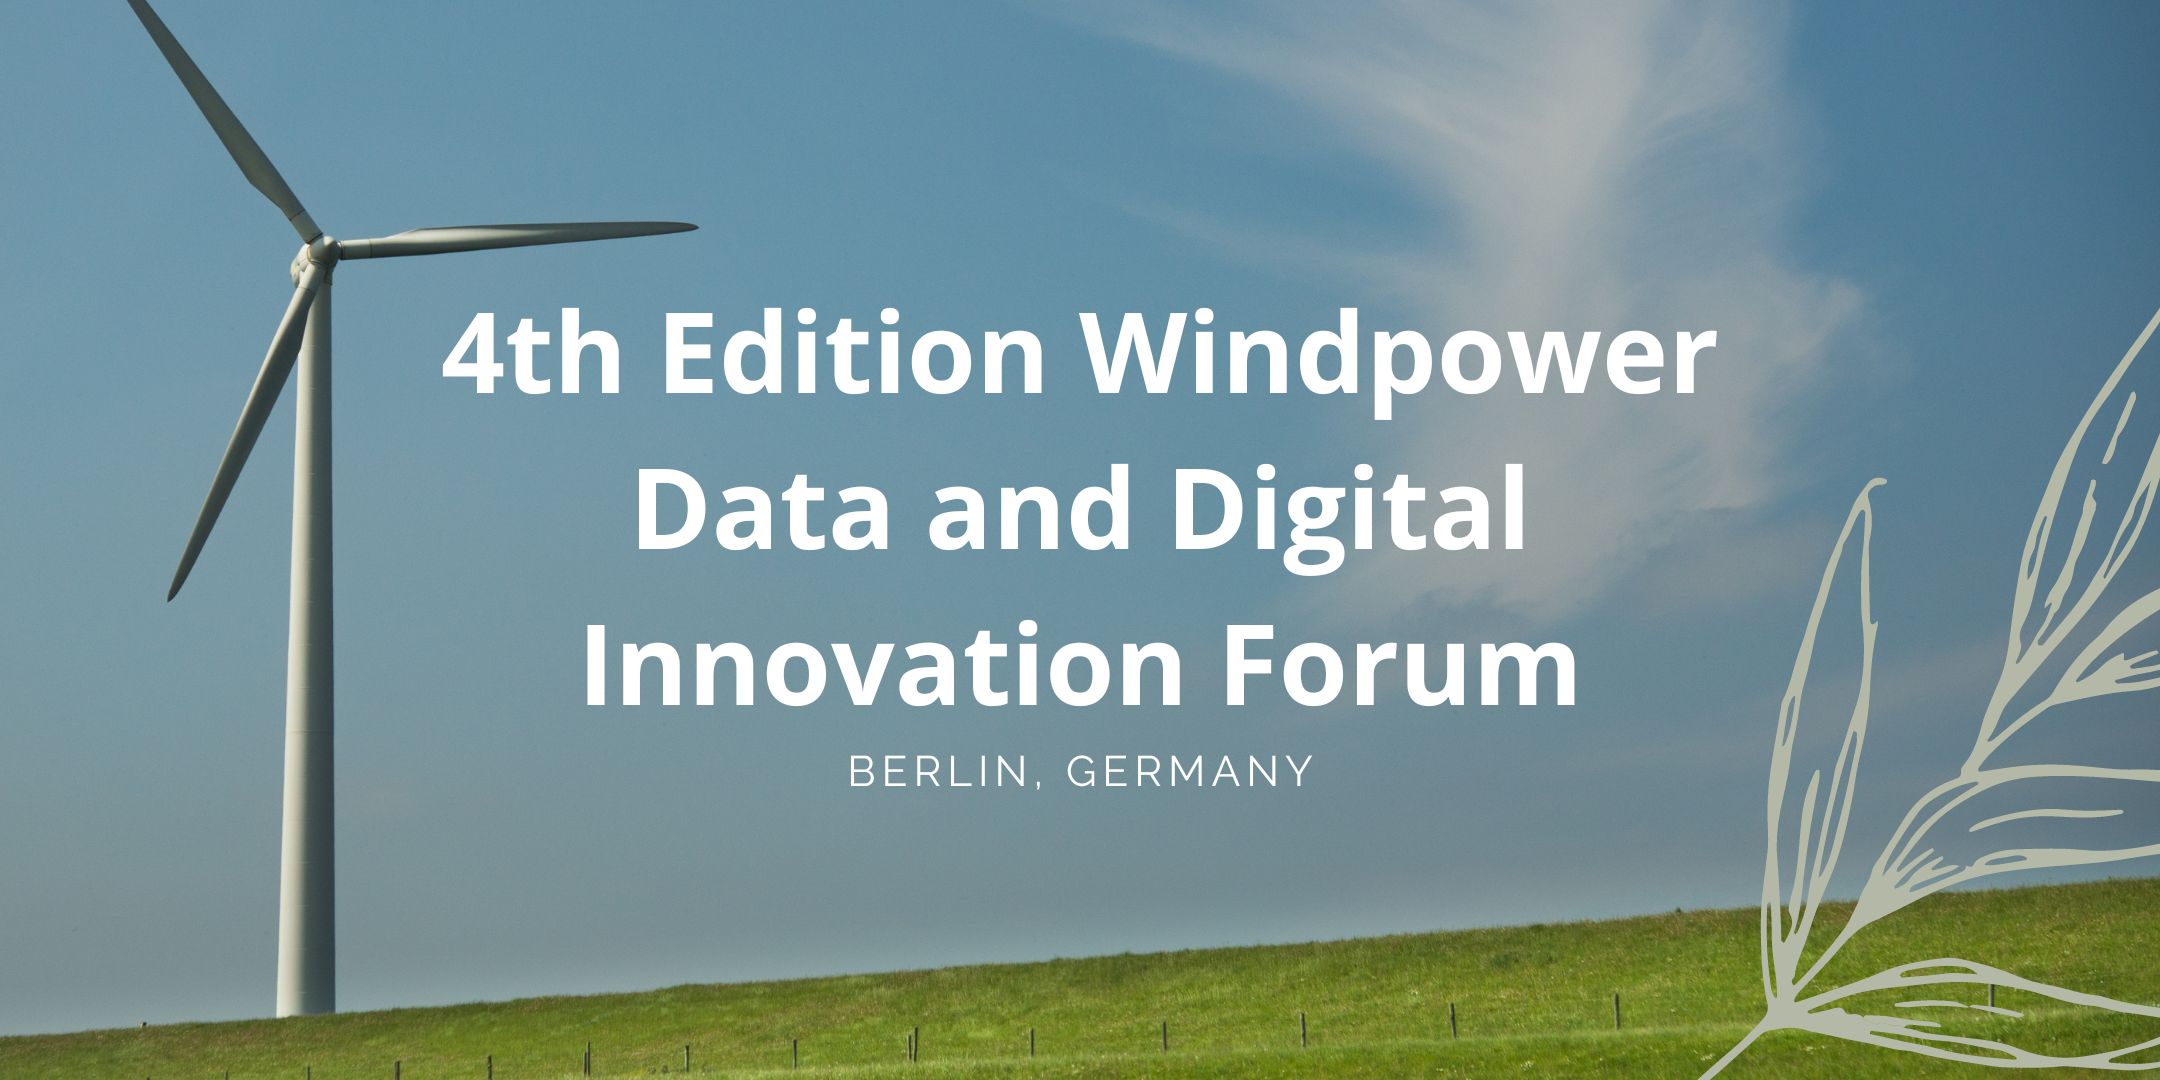 4th Edition Windpower Data and Digital Innovation Forum organized by Leadvent Group